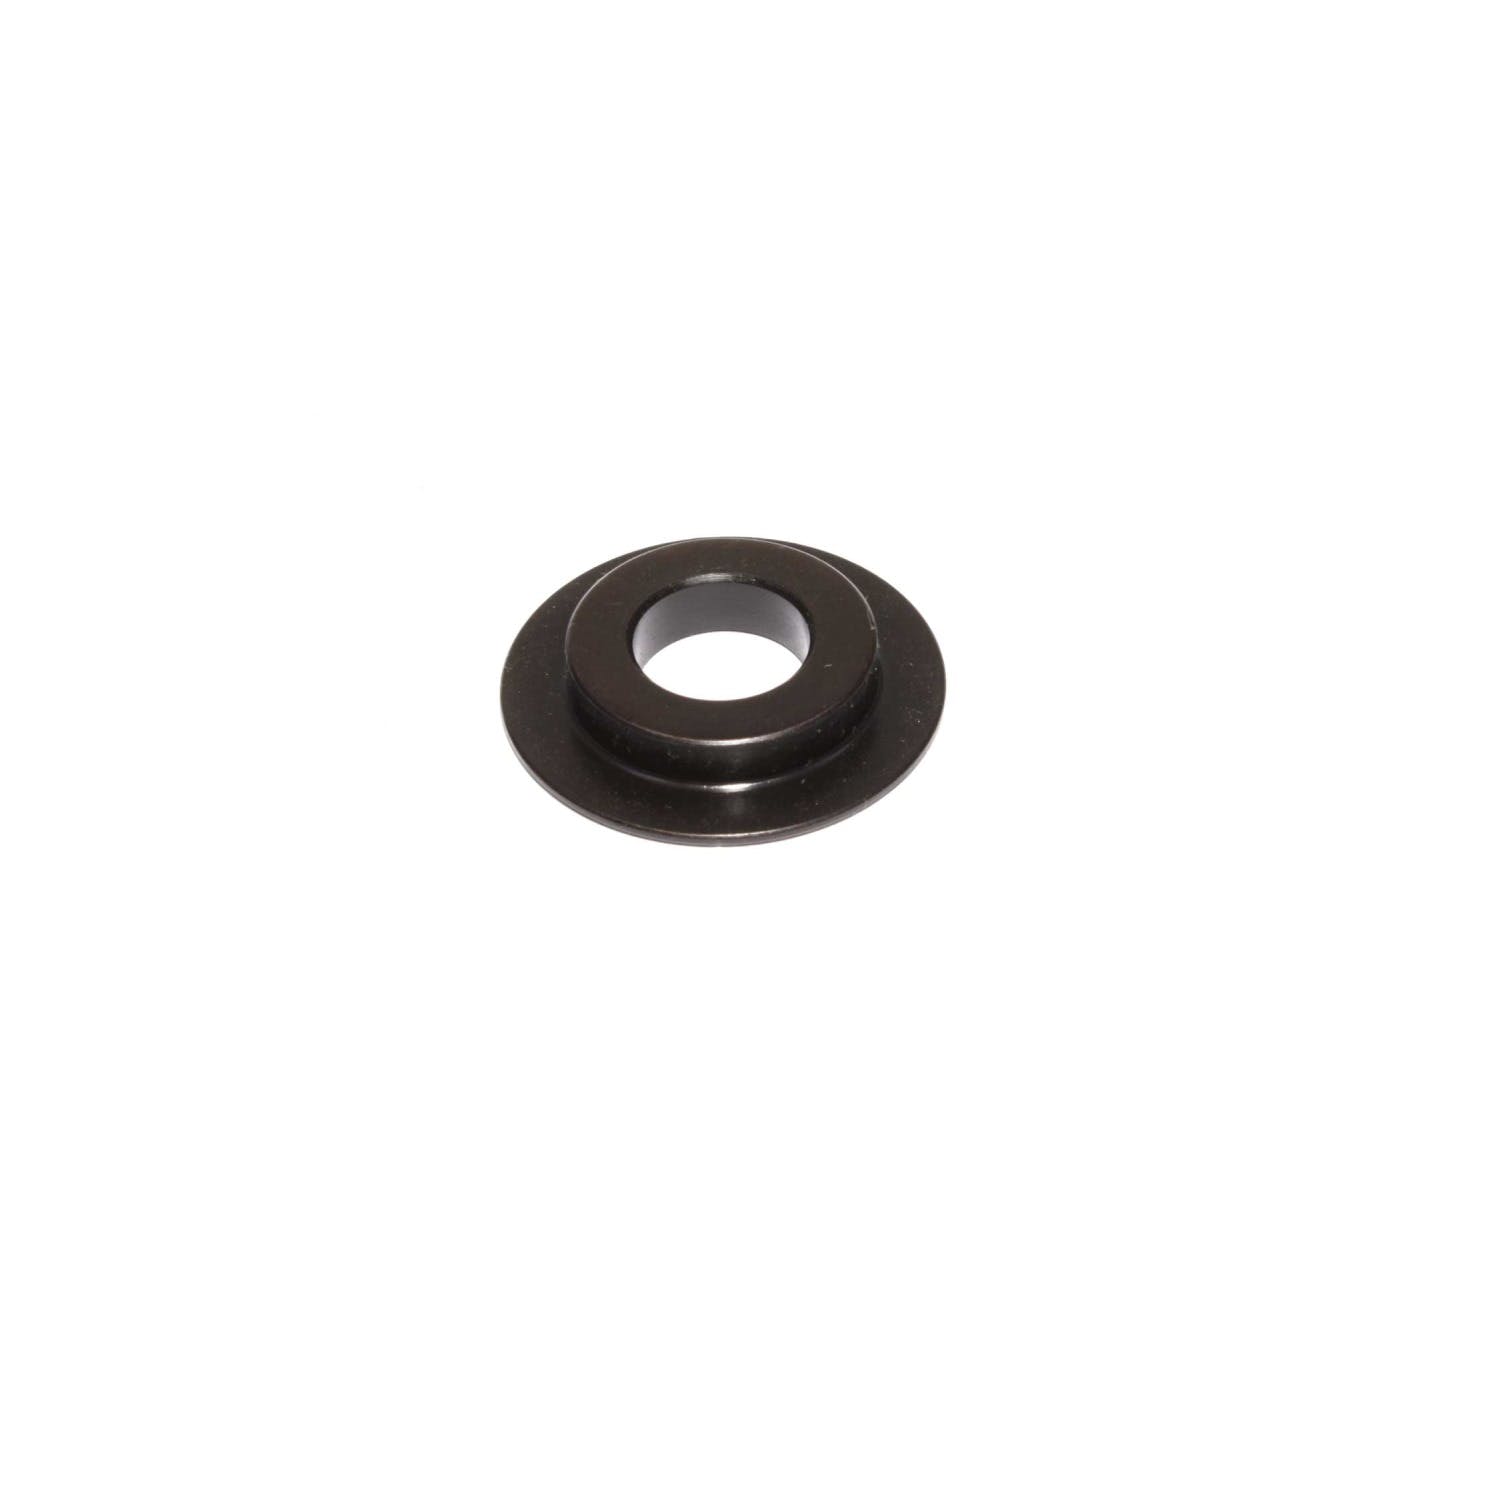 Competition Cams 4668-1 ID Spring Locator - 1.660 inch OD, .530 inch ID, .060 inch Thickness